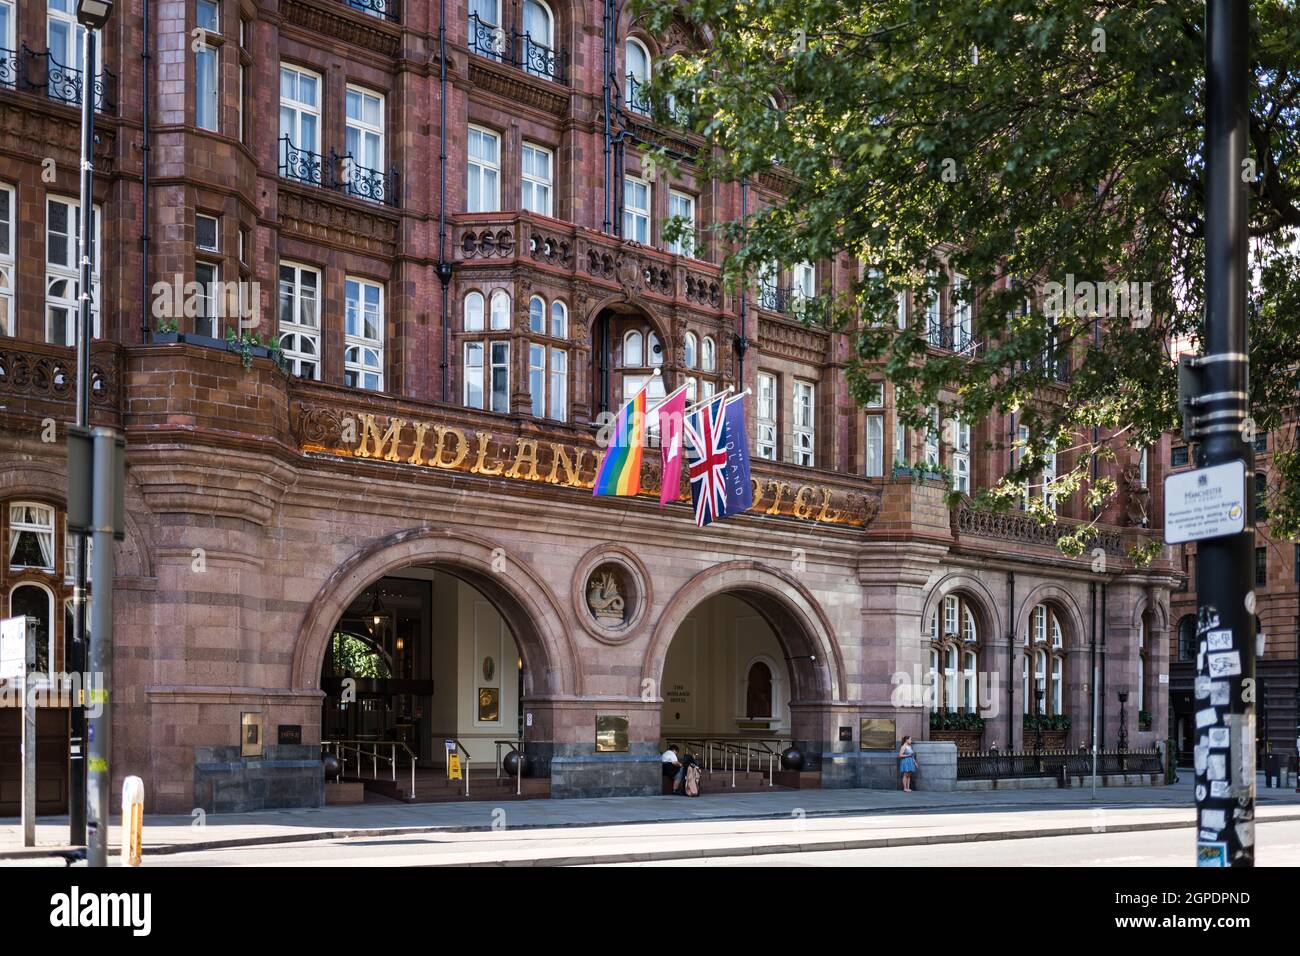 The Midland Hotel in Manchester 23.8.2021 - St Peters Square historic beautiful old hotel in city centre. Union Jack and Pride Flag flying outside. Stock Photo